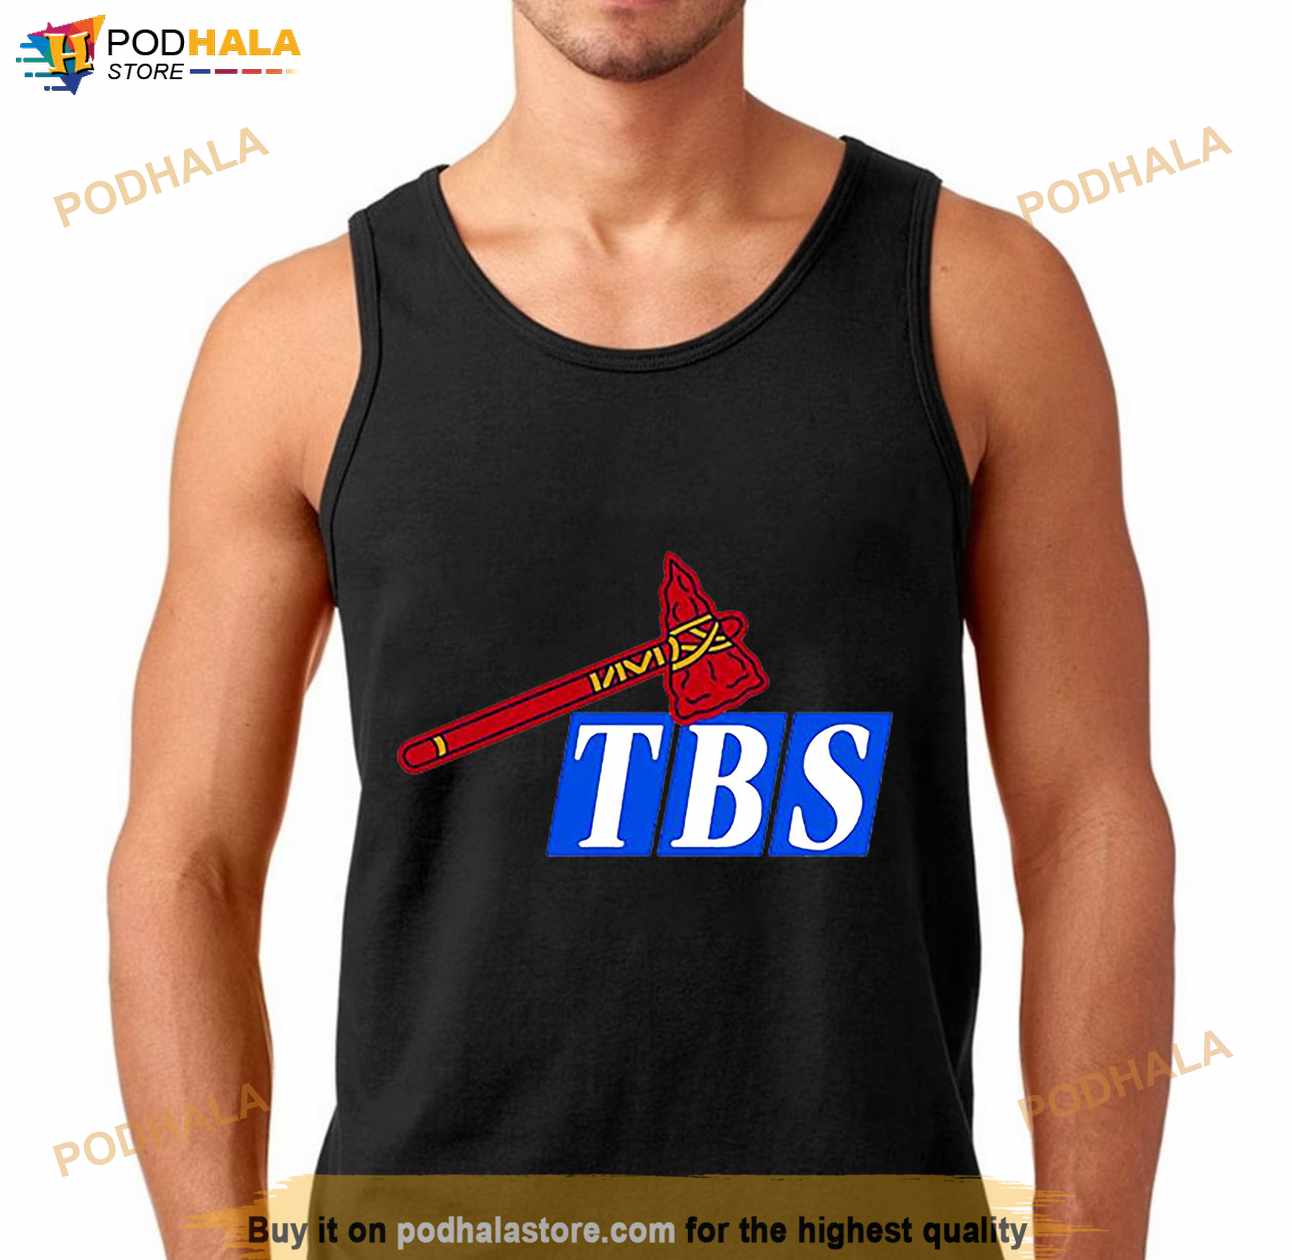 TBS Atlanta Braves Shirt - Bring Your Ideas, Thoughts And